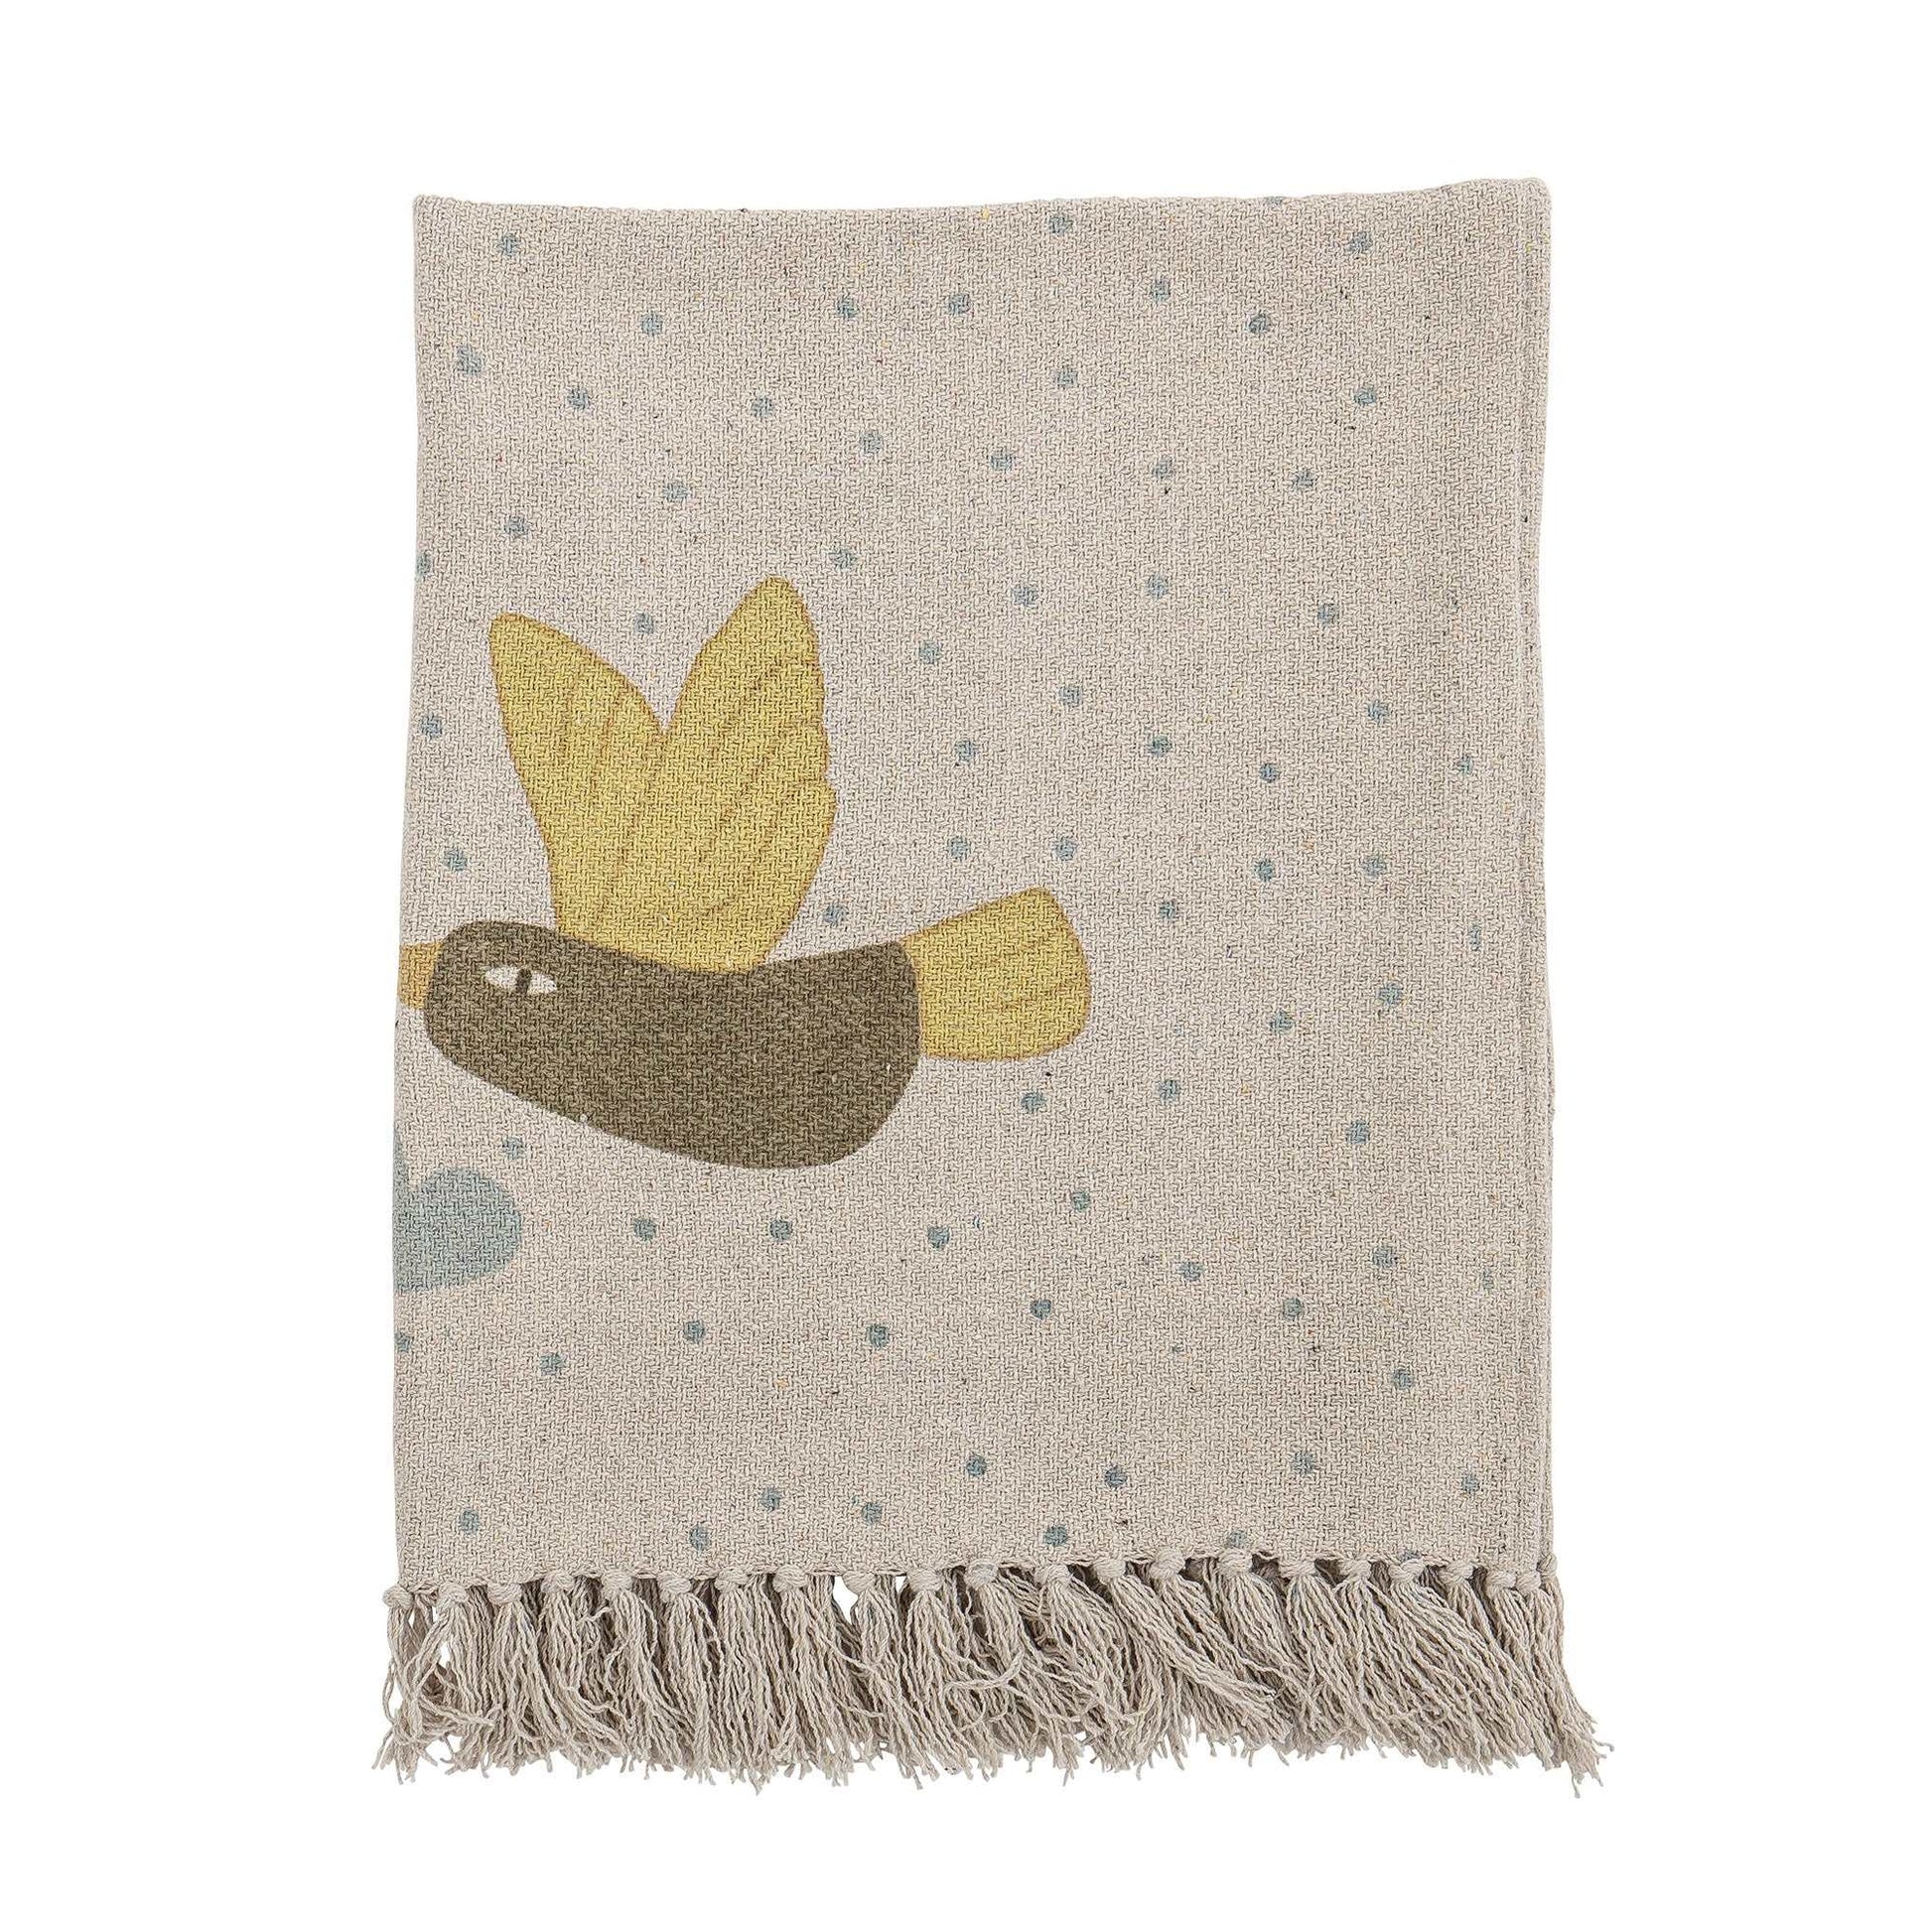 The Alois Throw by Bloomingville MINI has a beautiful and relaxing print with bird pattern. The throw is made of recycled cotton material and has tassels, which gives a modern look. It is a soft, warm and cozy throw that you easily can use in other rooms than the children's room. Dimensions: L100cm xH80cm Material : recycled Cotton